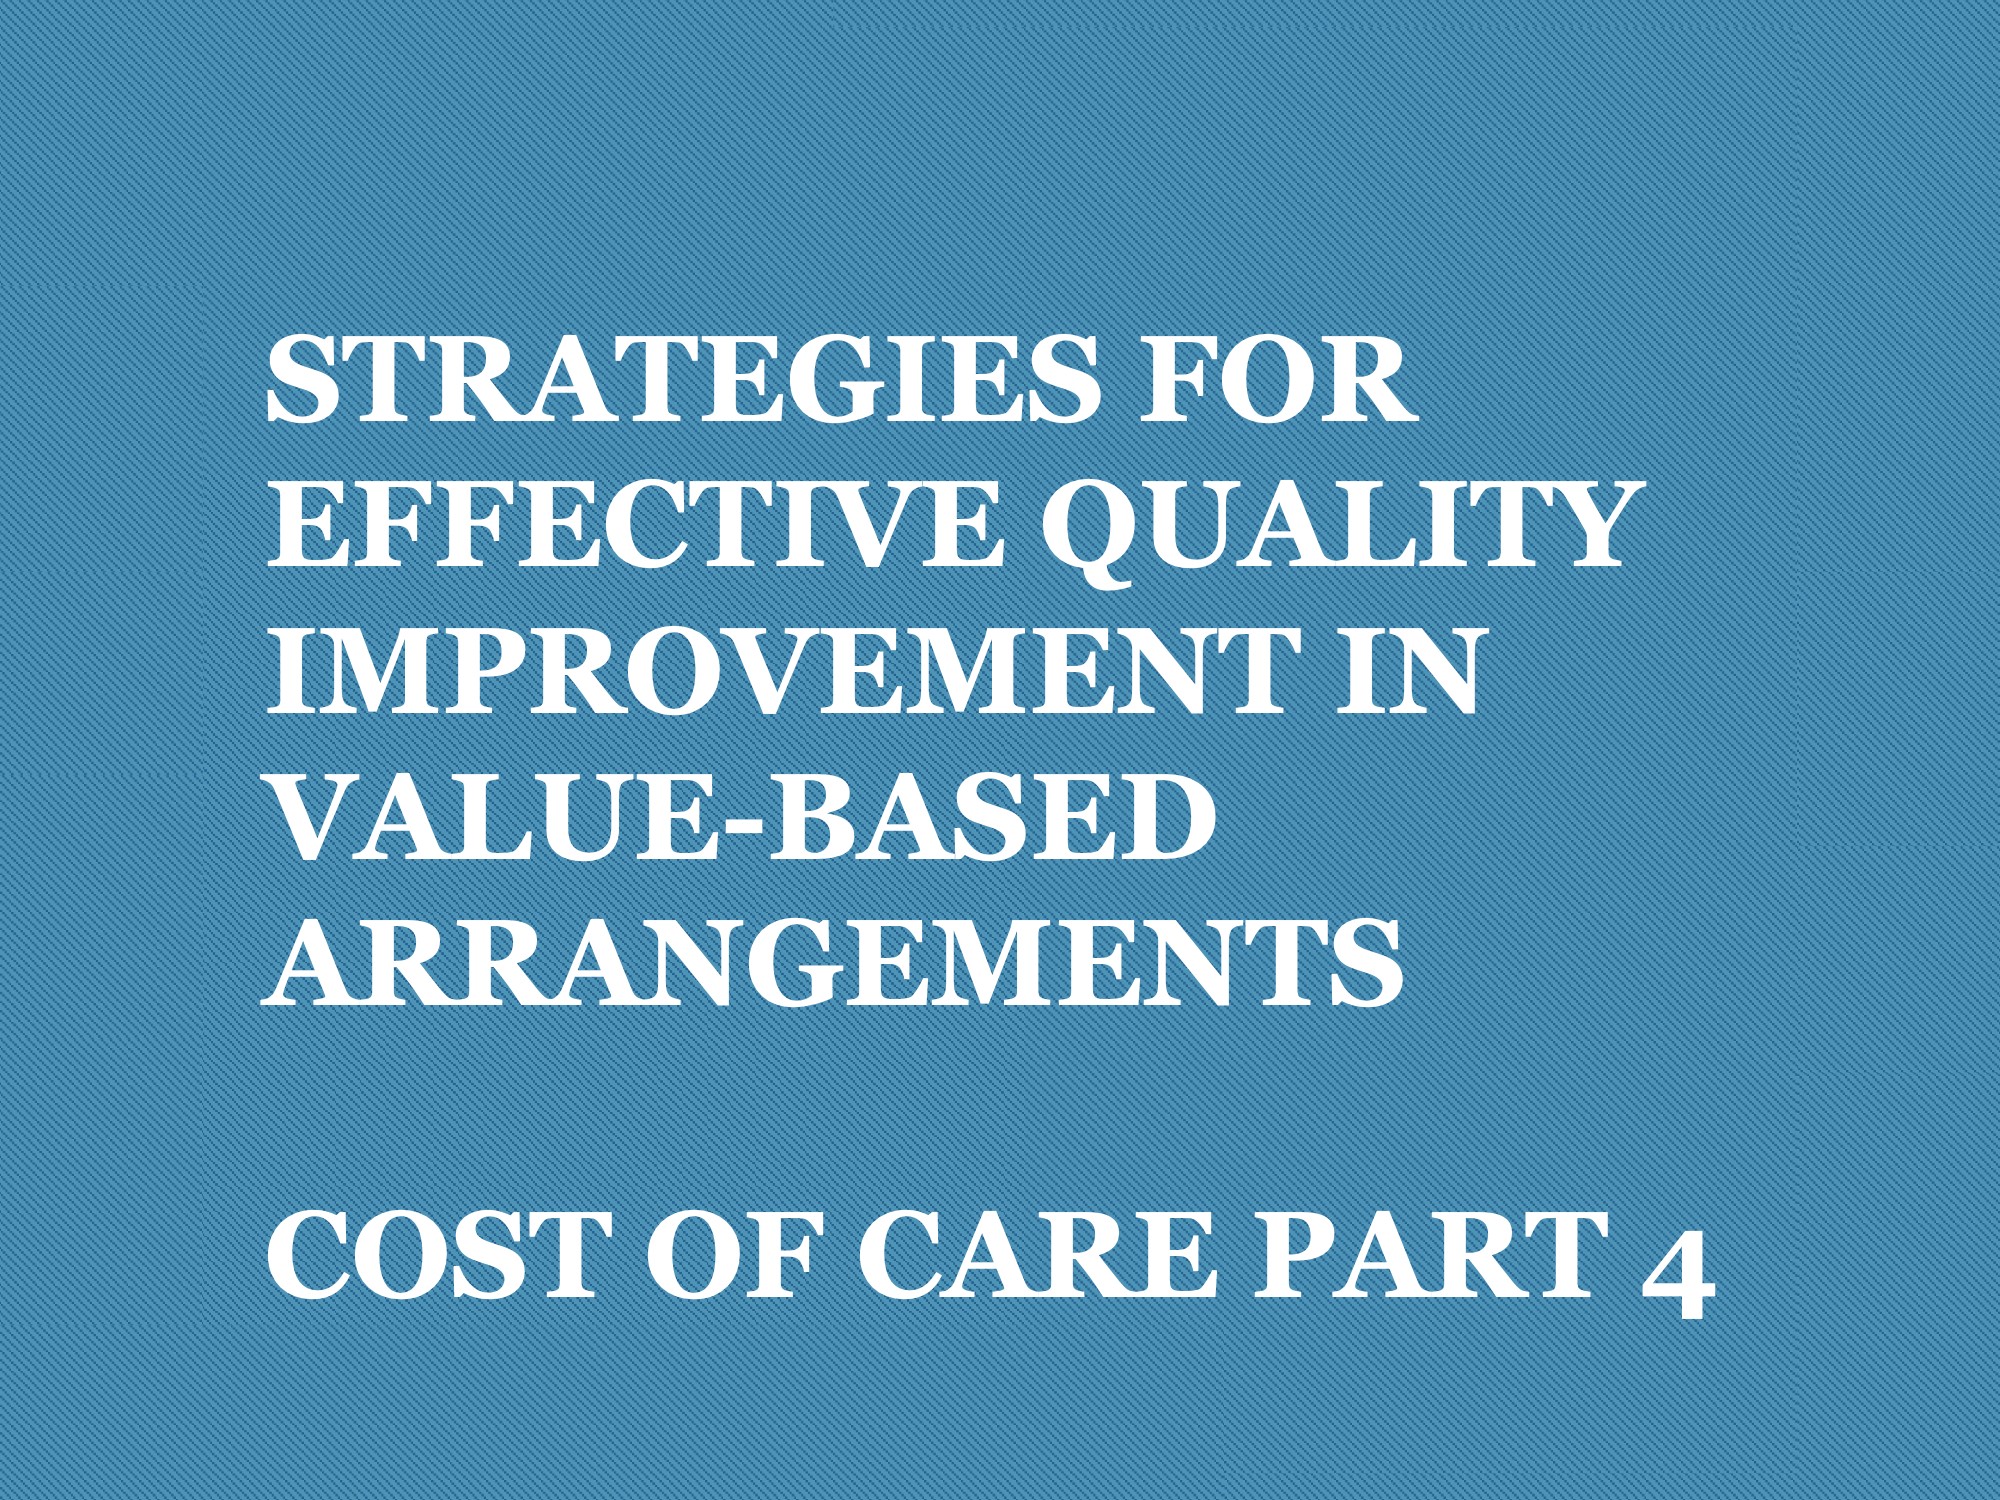 Strategies For Effective Quality Improvement In Value Based Arrangements – Cost of Care Part 4